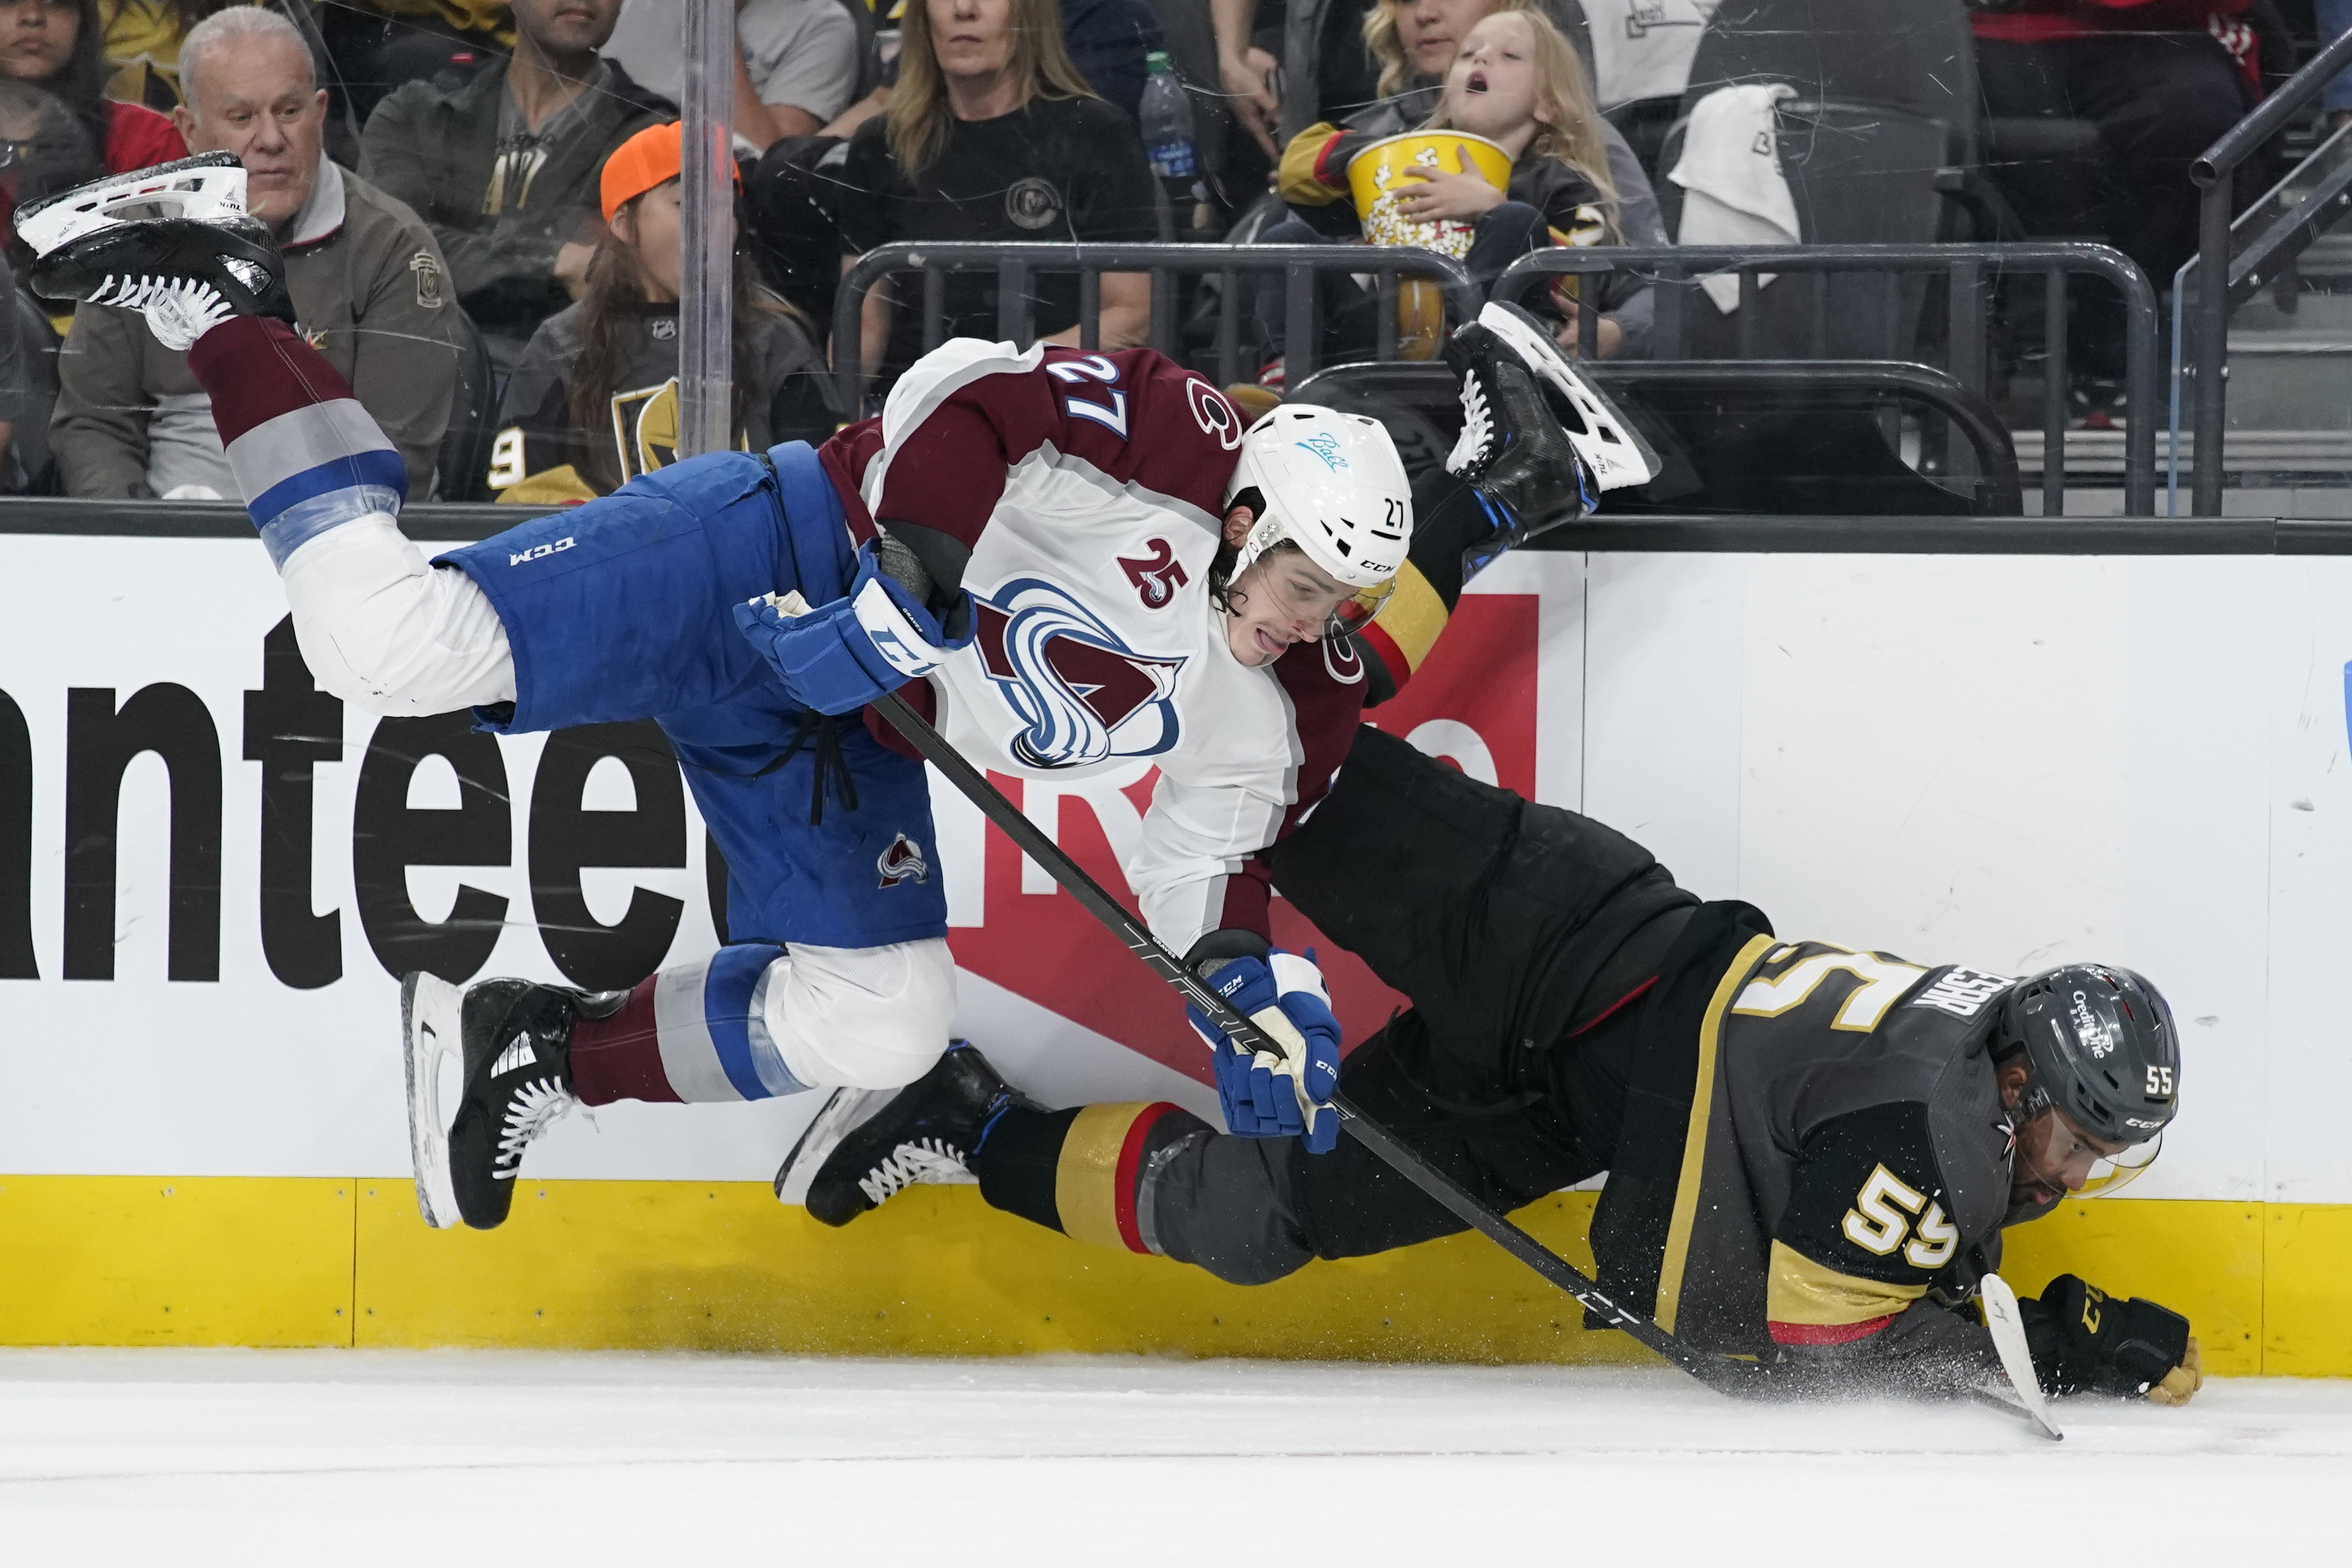 Vegas Golden Knights at Colorado Avalanche Game 5 free live stream (6/8/21) How to watch NHL, time, channel